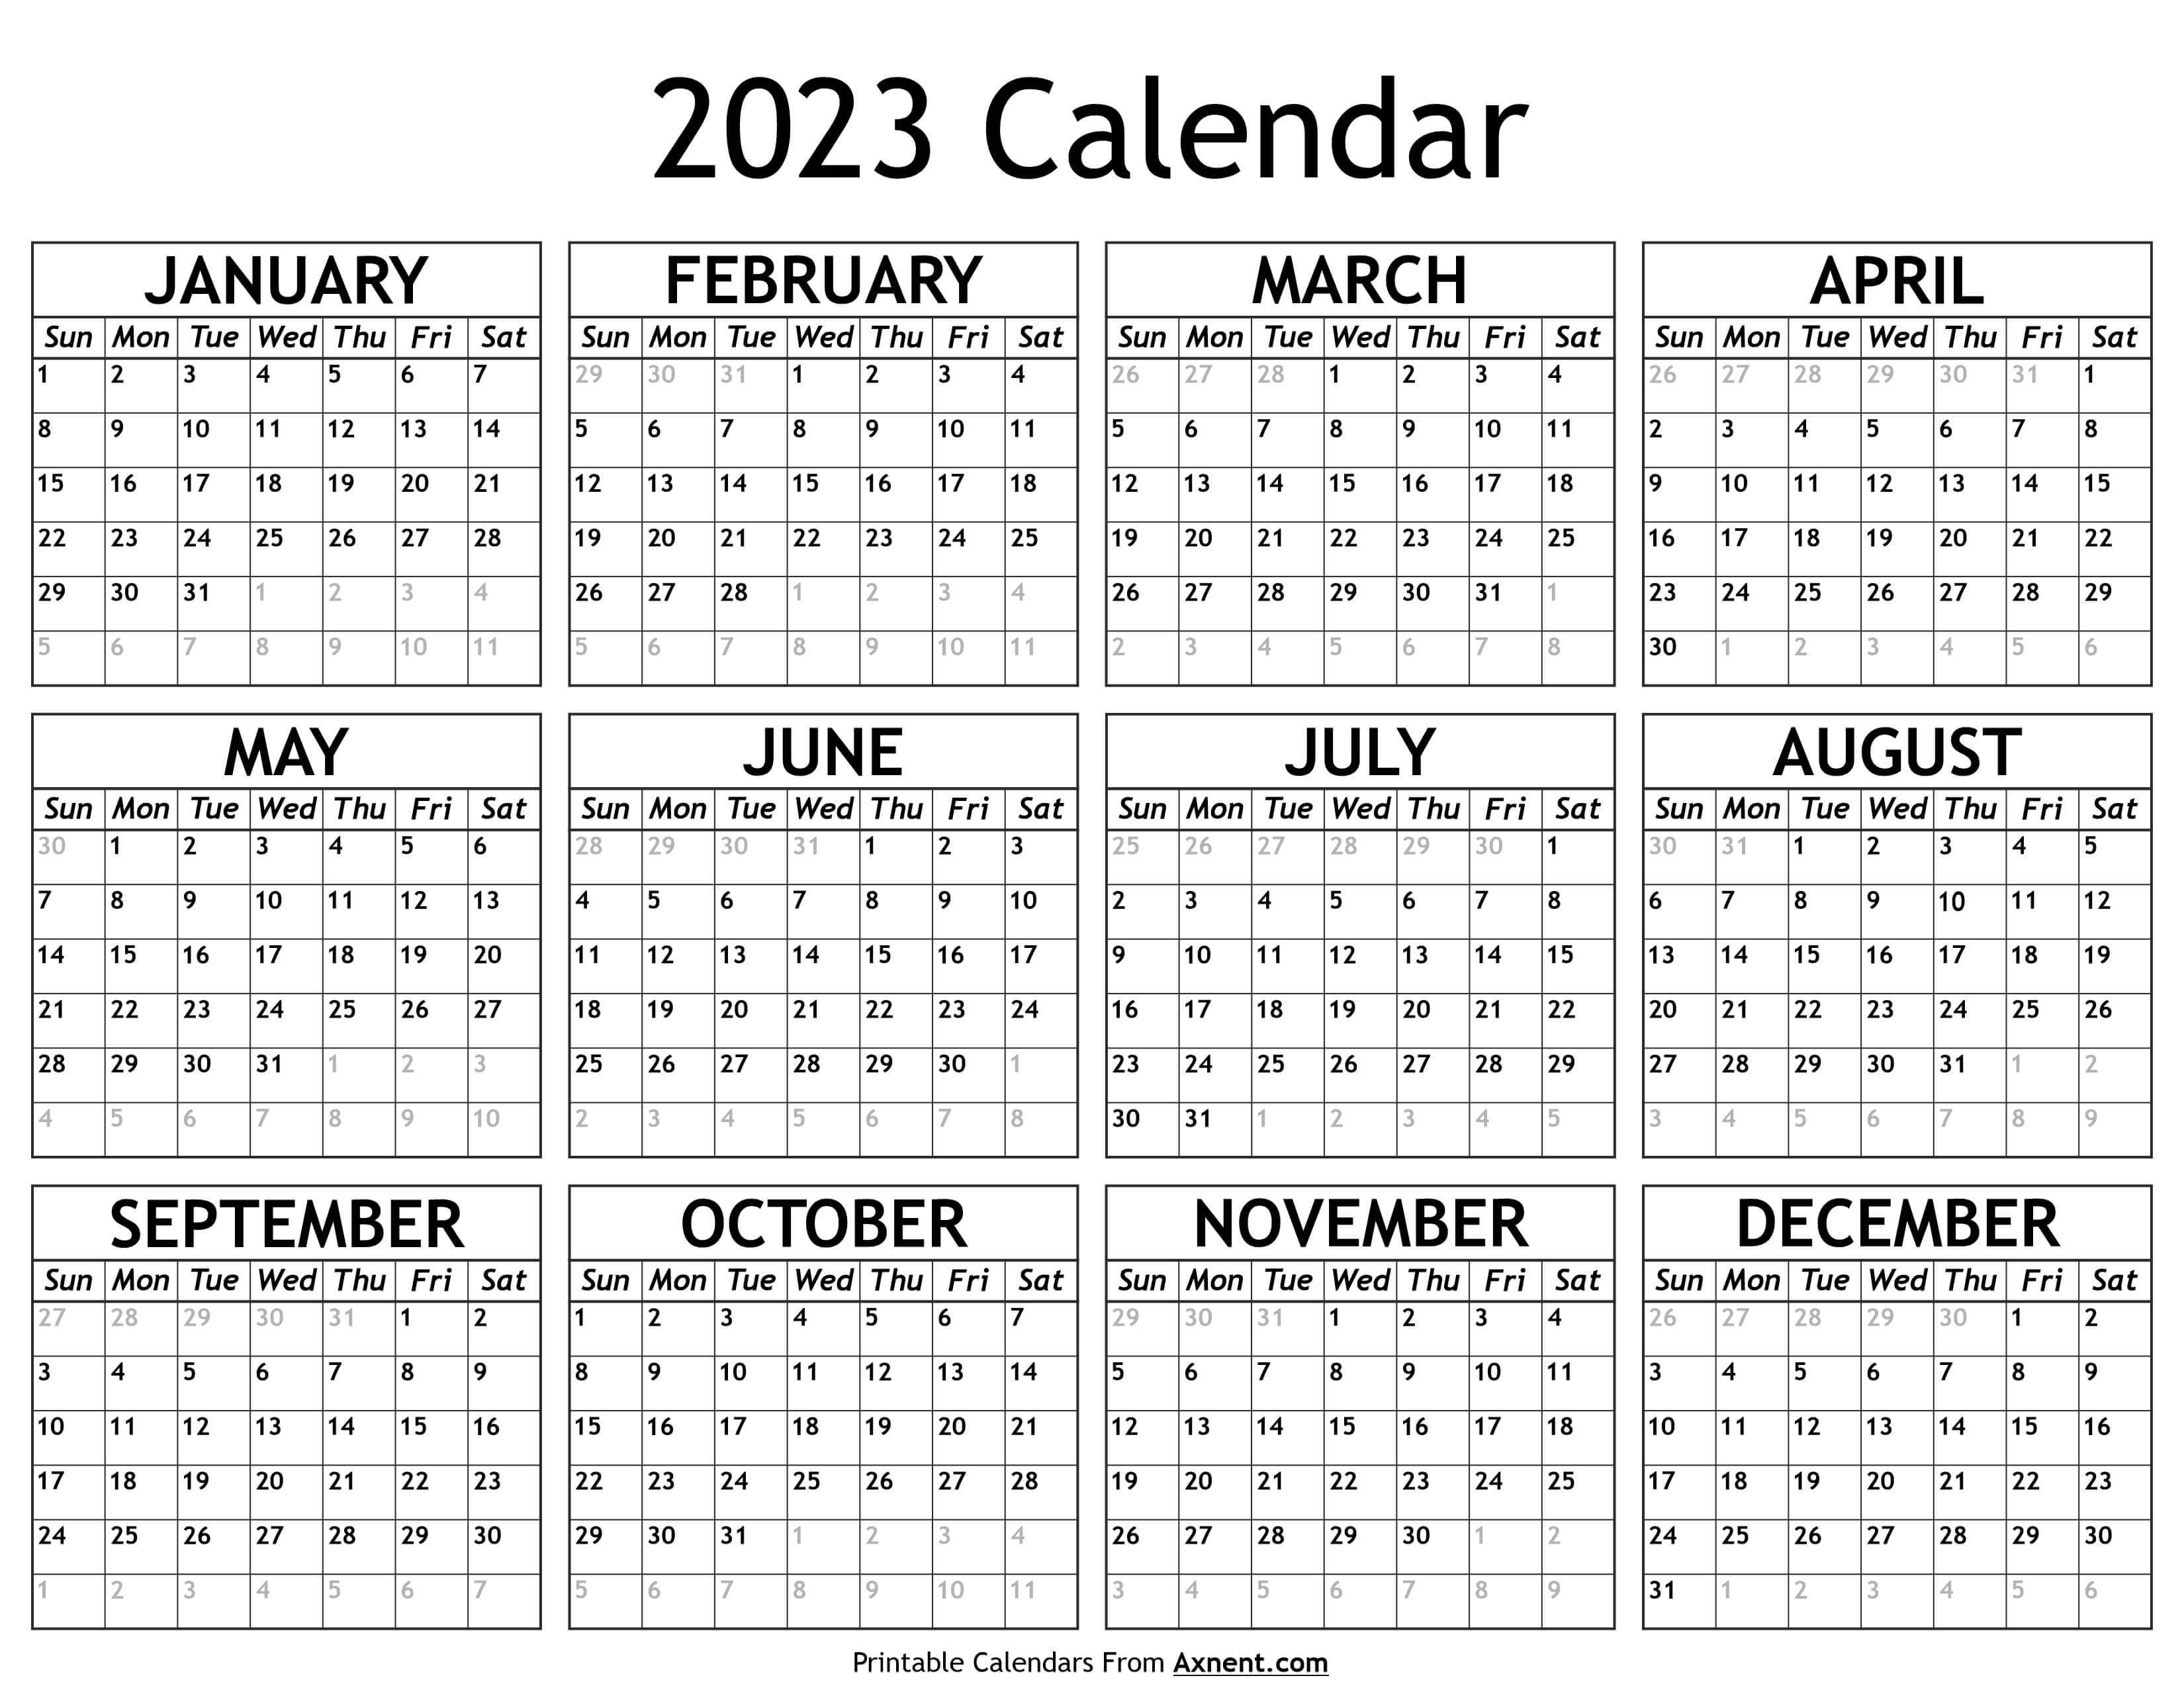 printable 2023 calendar time management tools by axnent